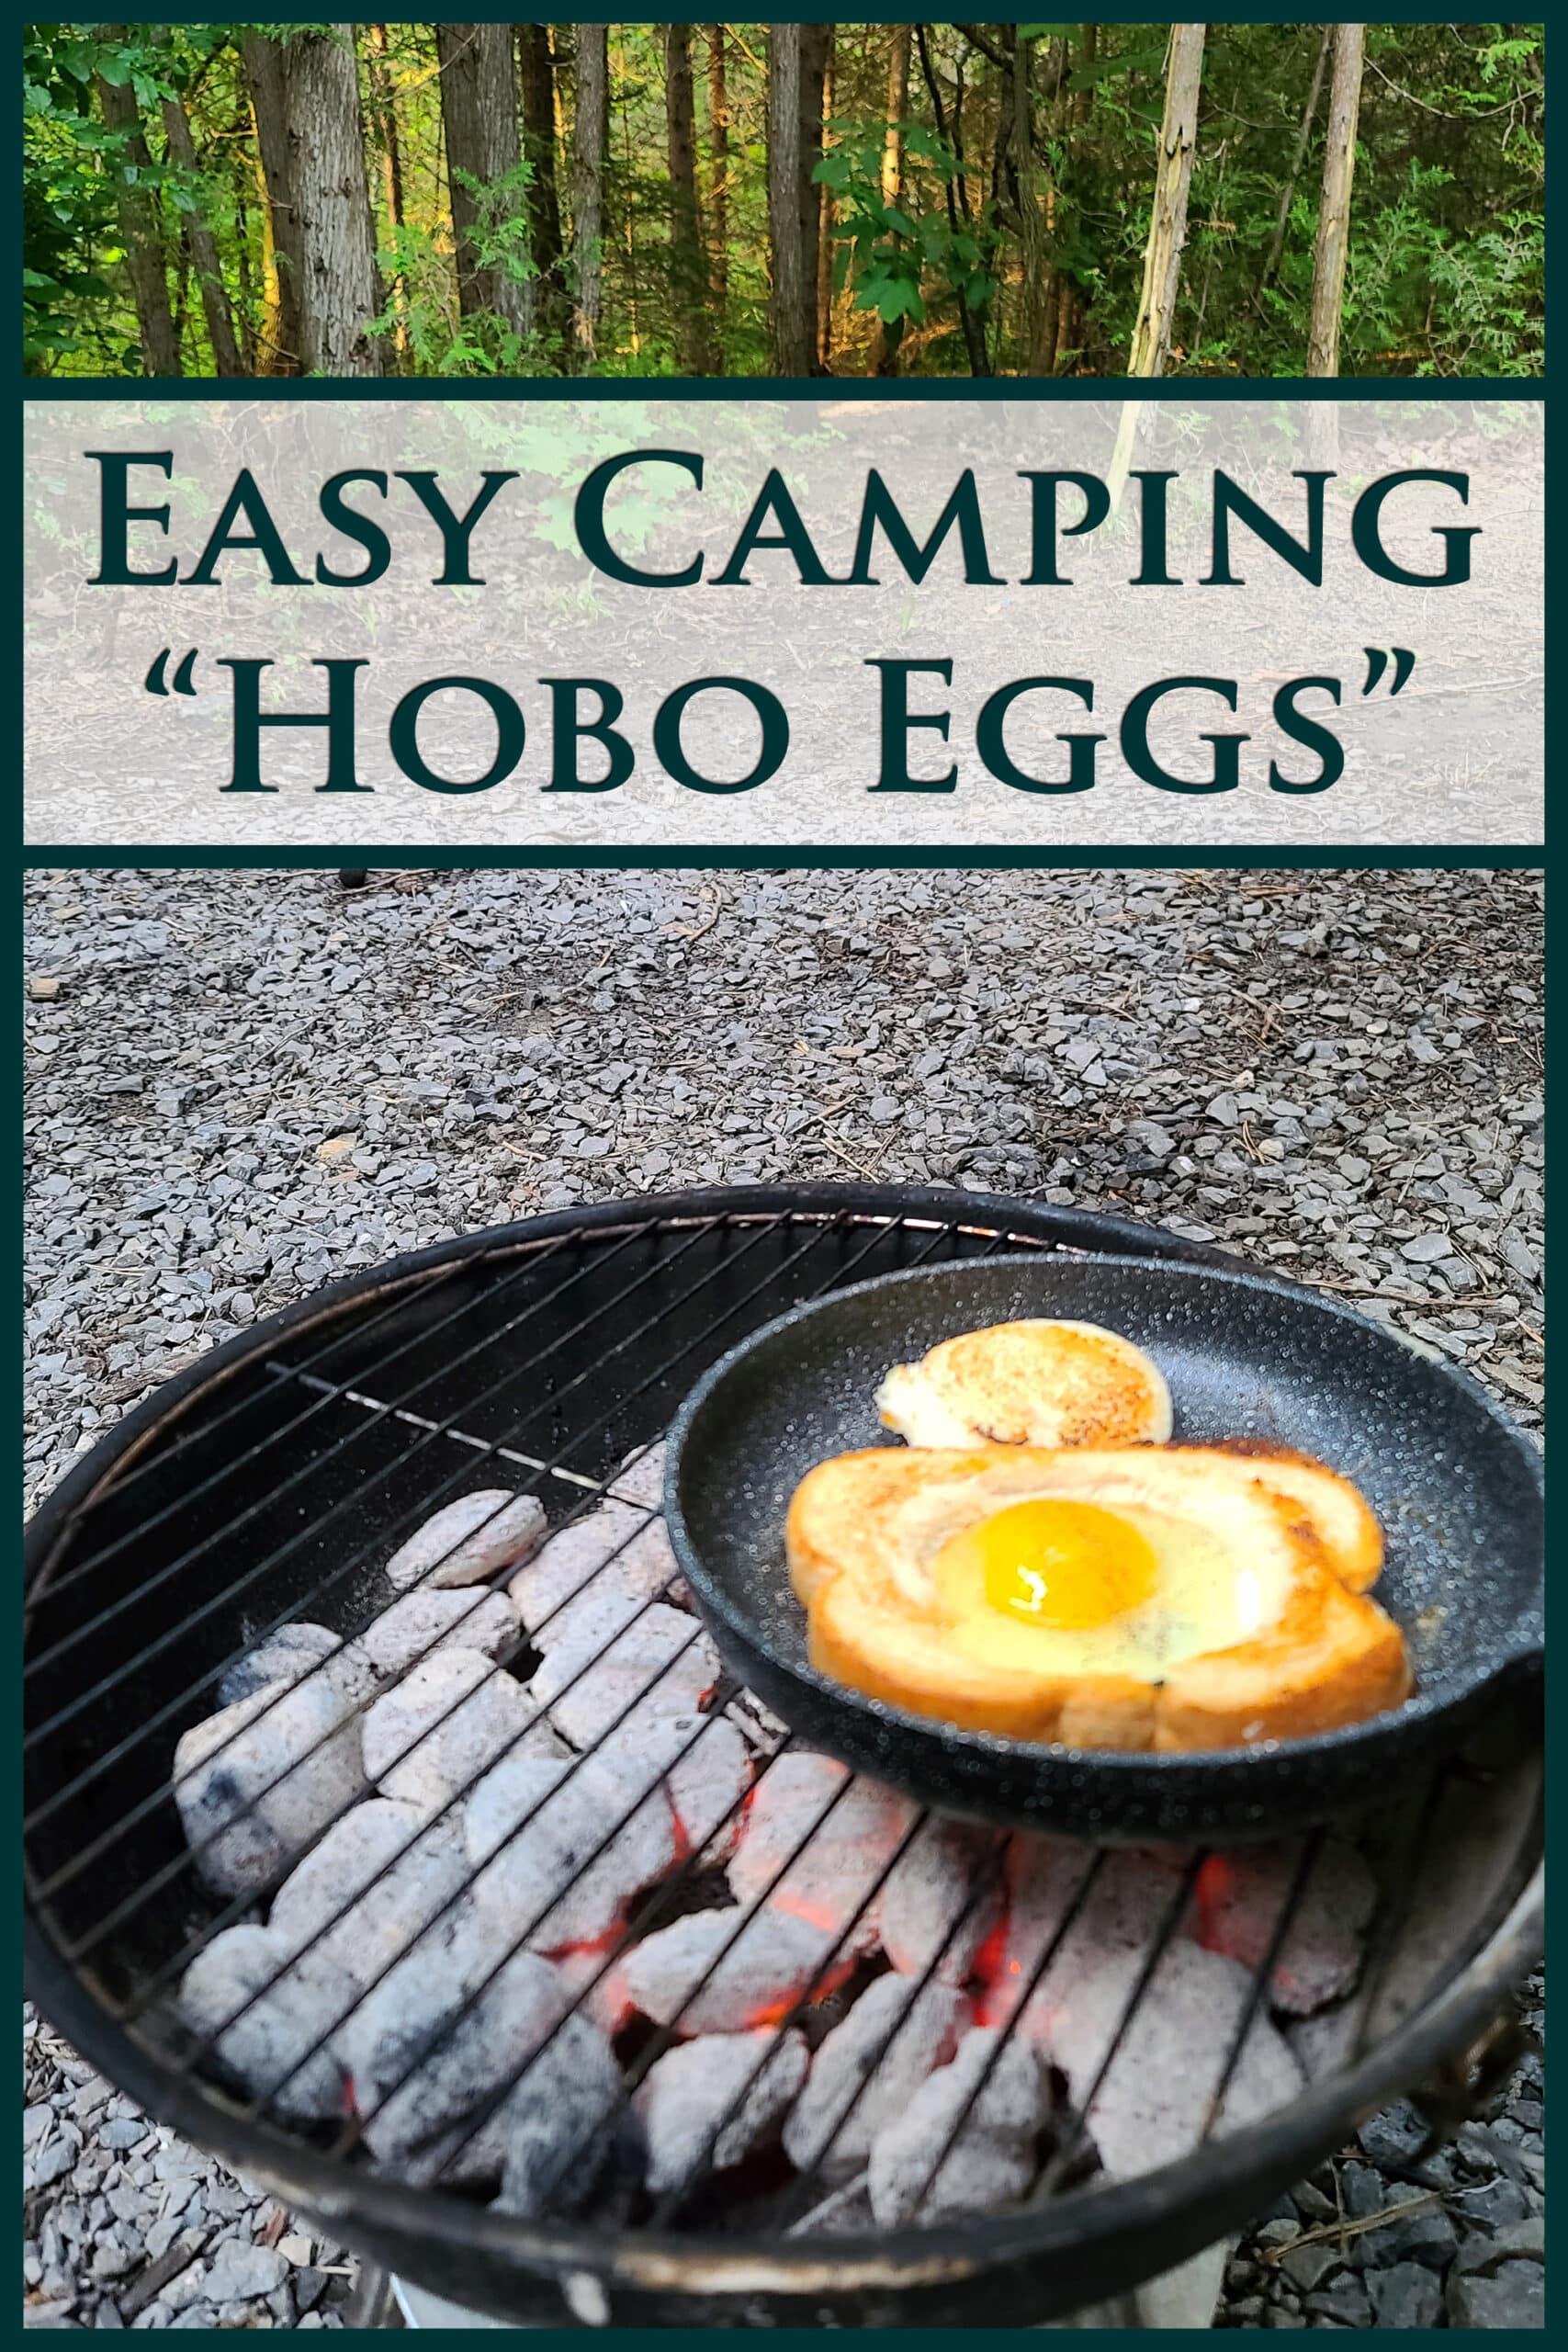 A small cast iron pan with bread and eggs cooking over a fire. Overlaid text says easy camping hobo eggs.